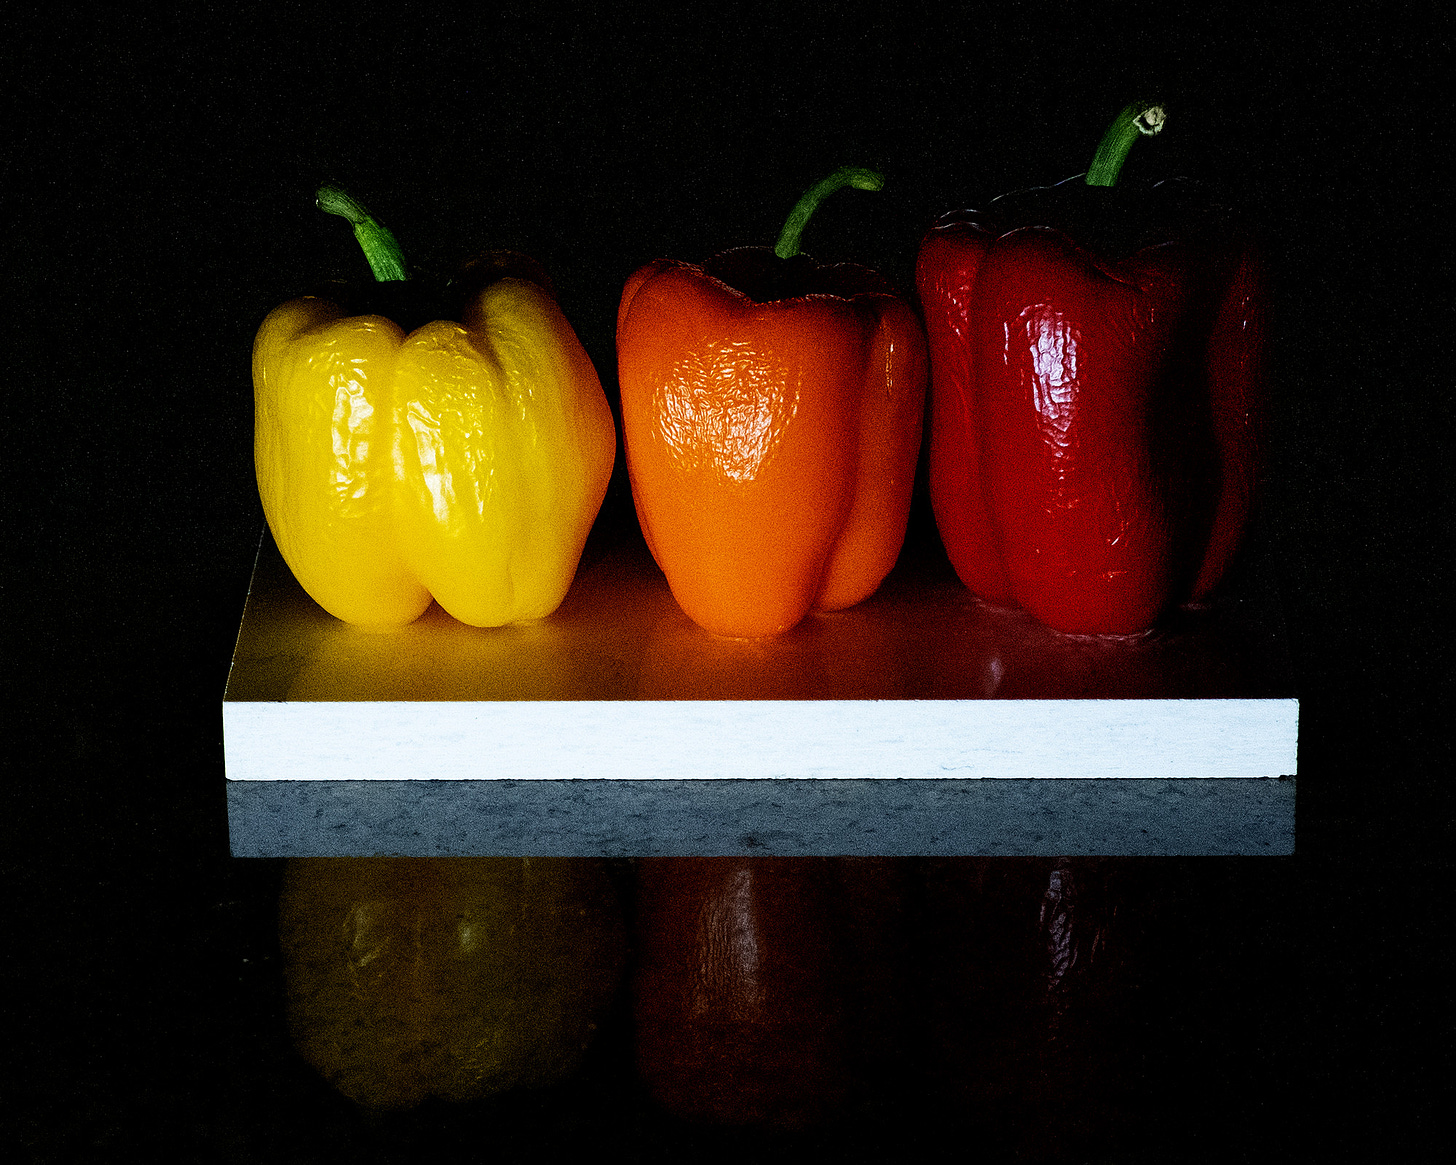 A red, orange, and yellow bell pepper arranged in a row on top of a white tile.  The scene is engulfed by shadows.